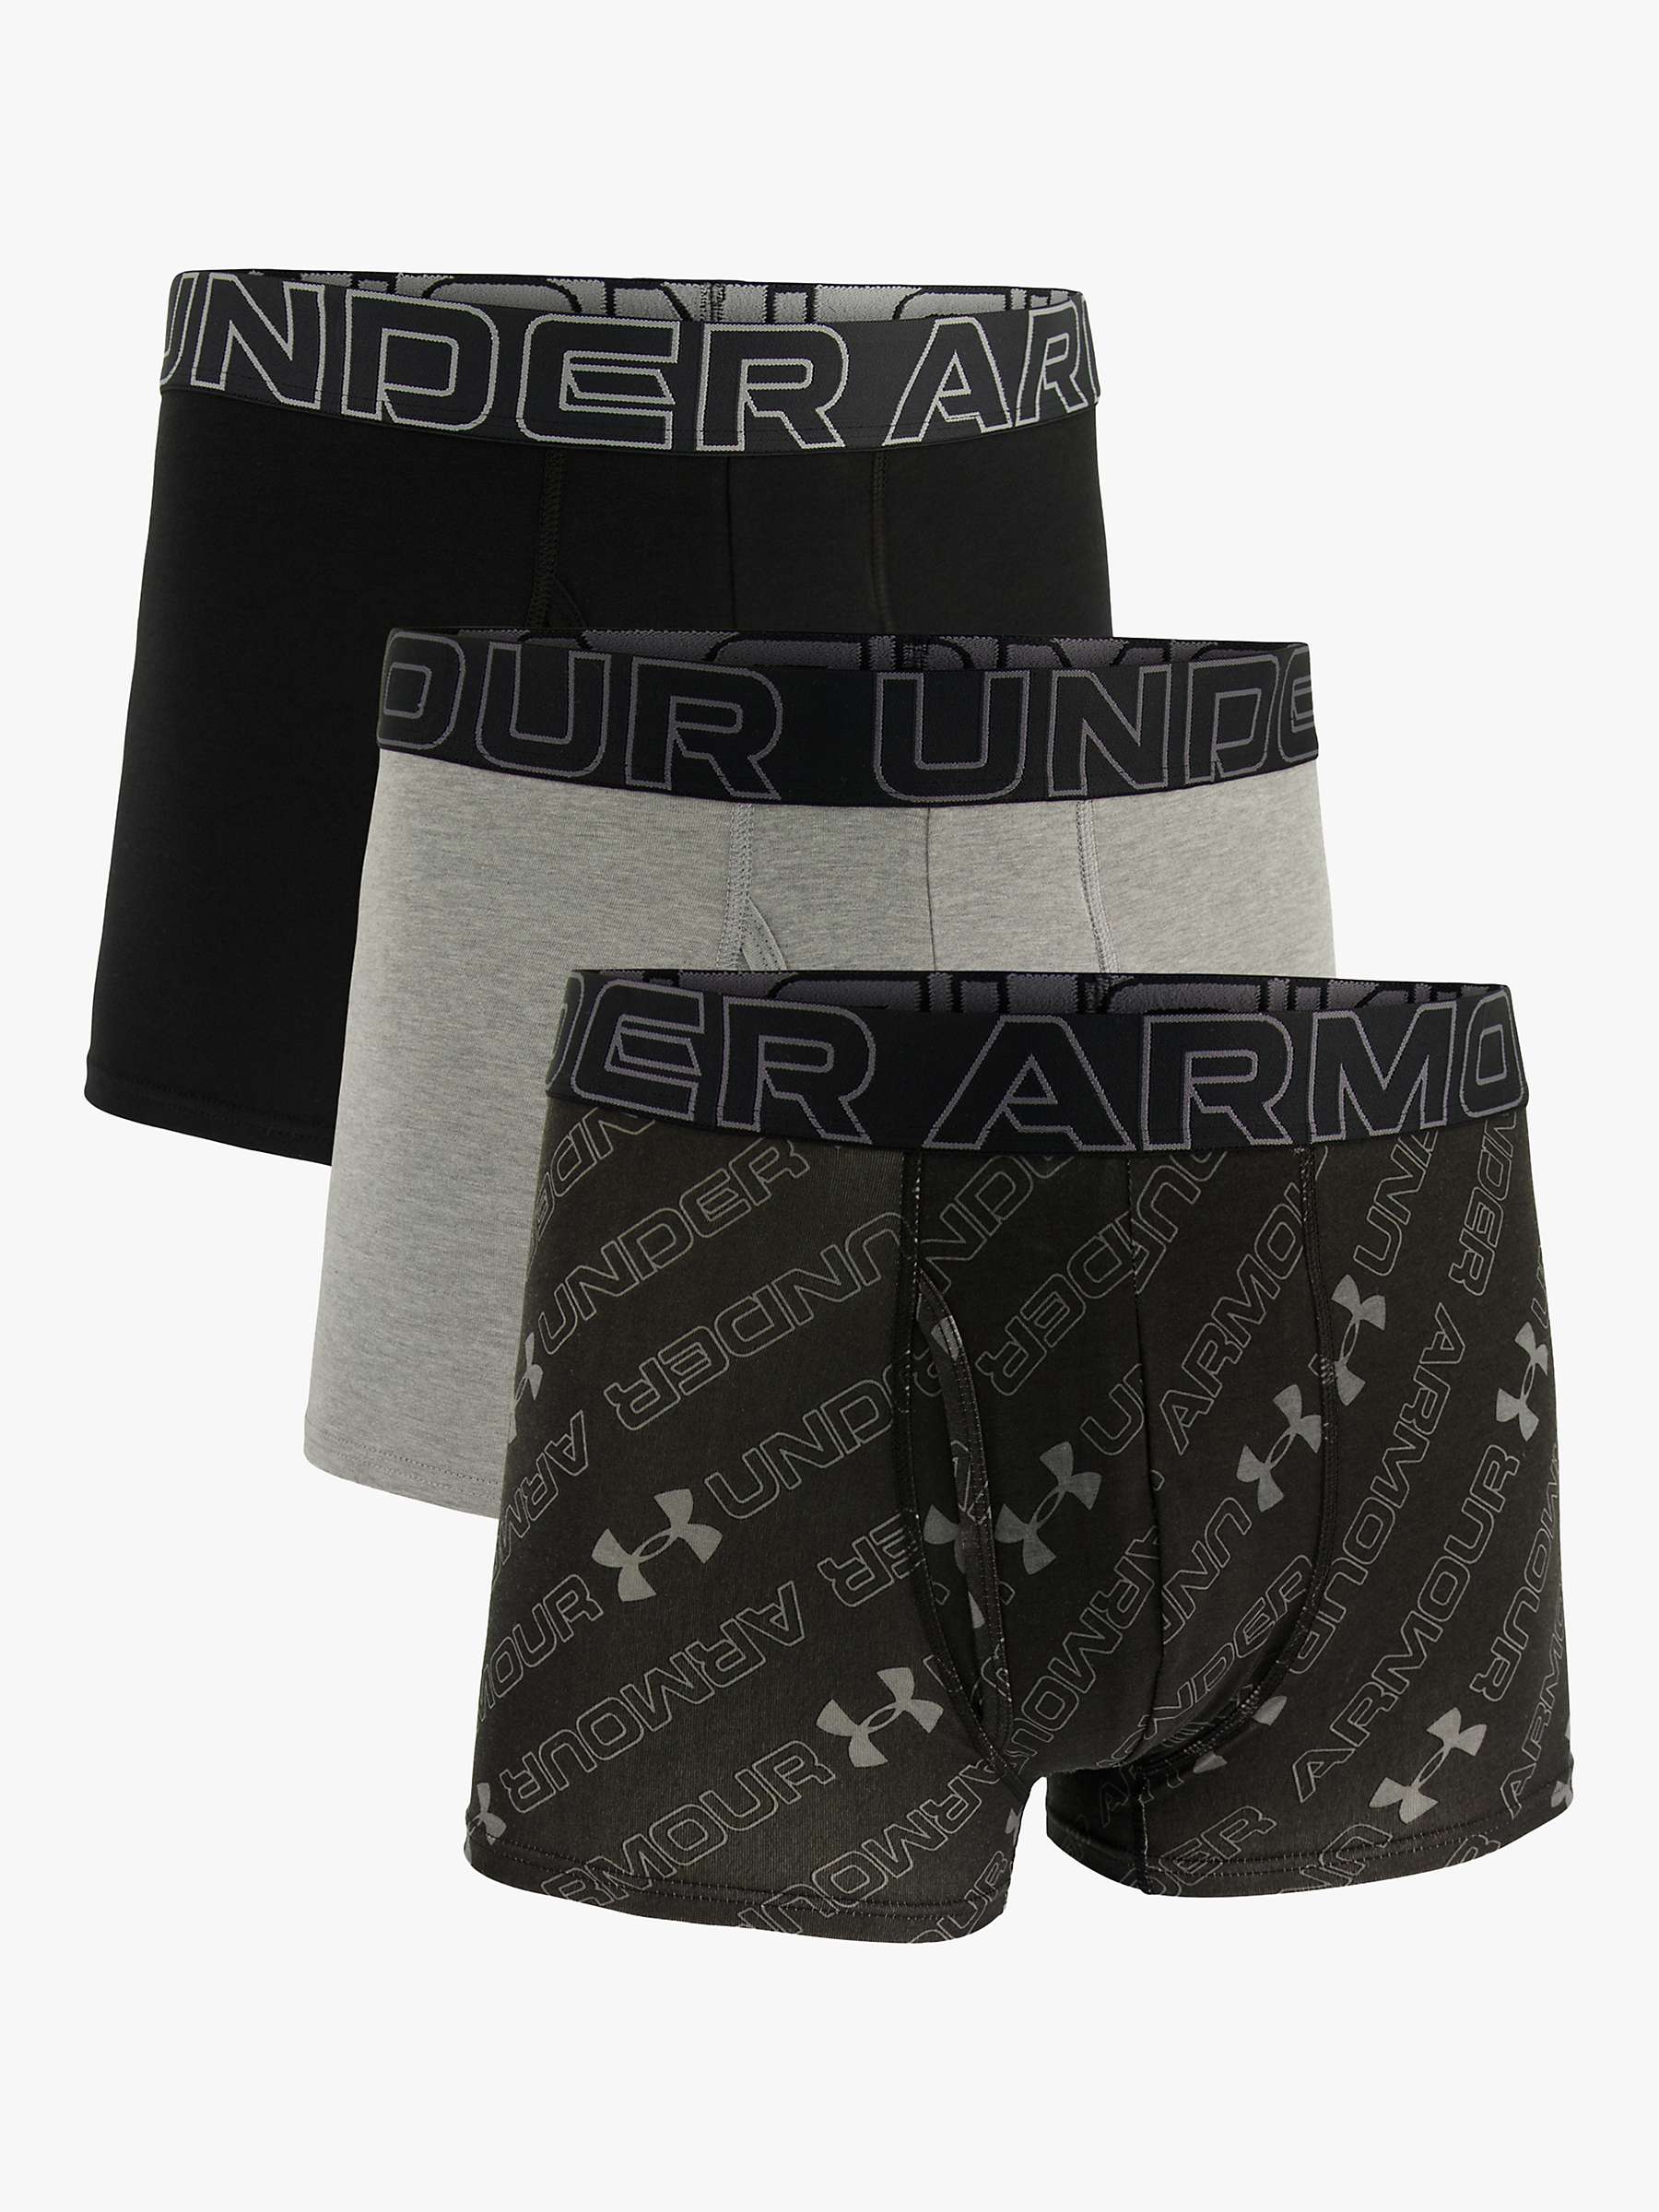 Buy Under Armour Performance Comfort Boxers, Pack of 3, Grey/Black Online at johnlewis.com